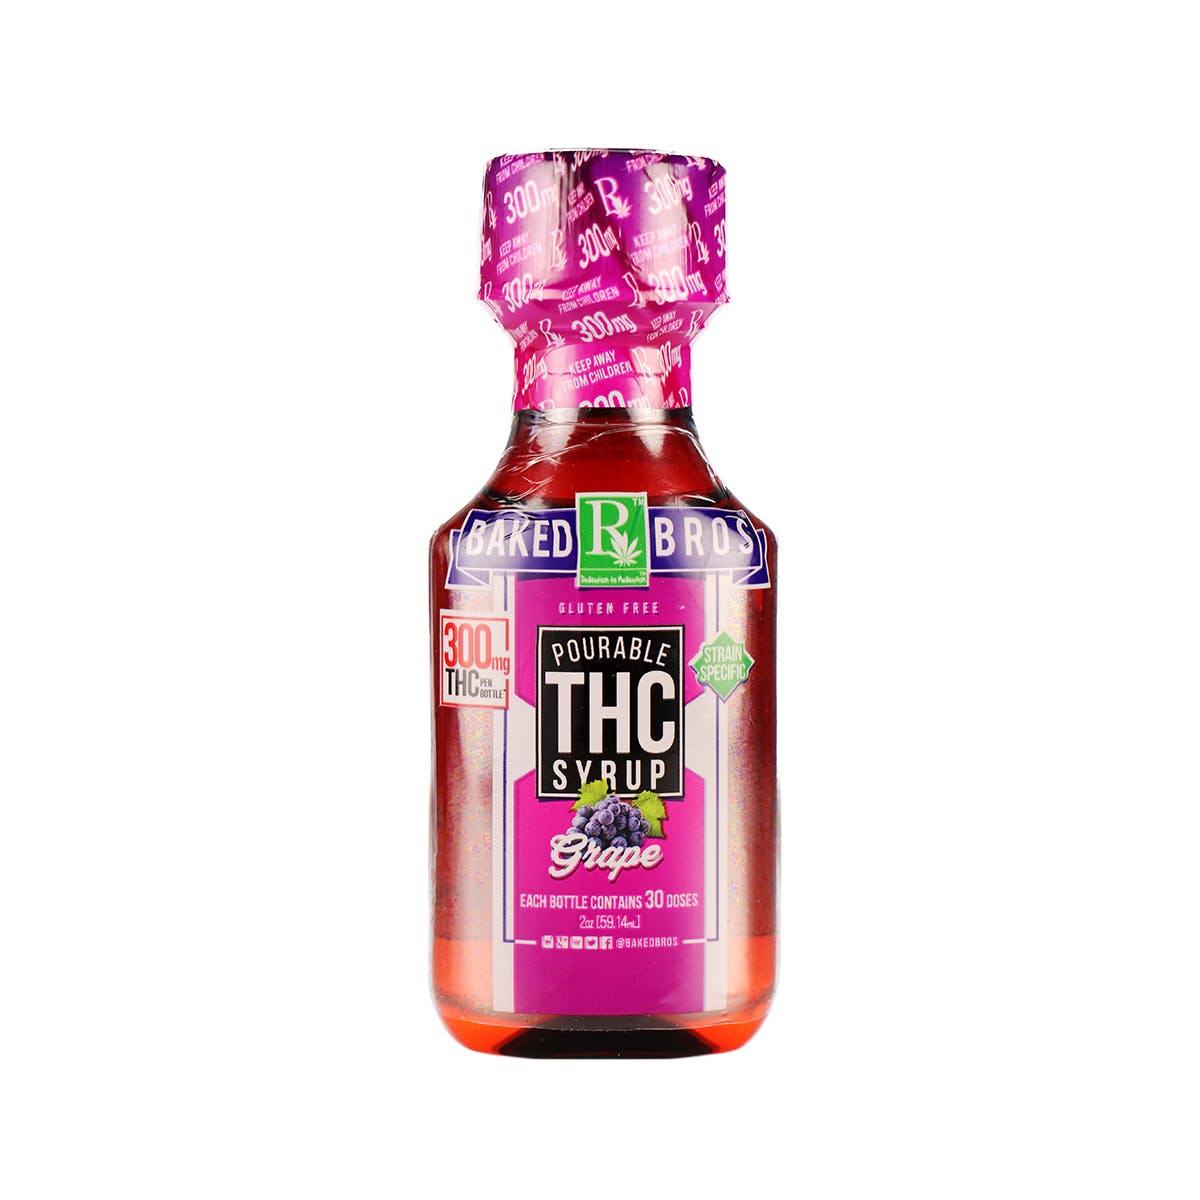 drink-baked-bros-thc-syrup-grape-300mg